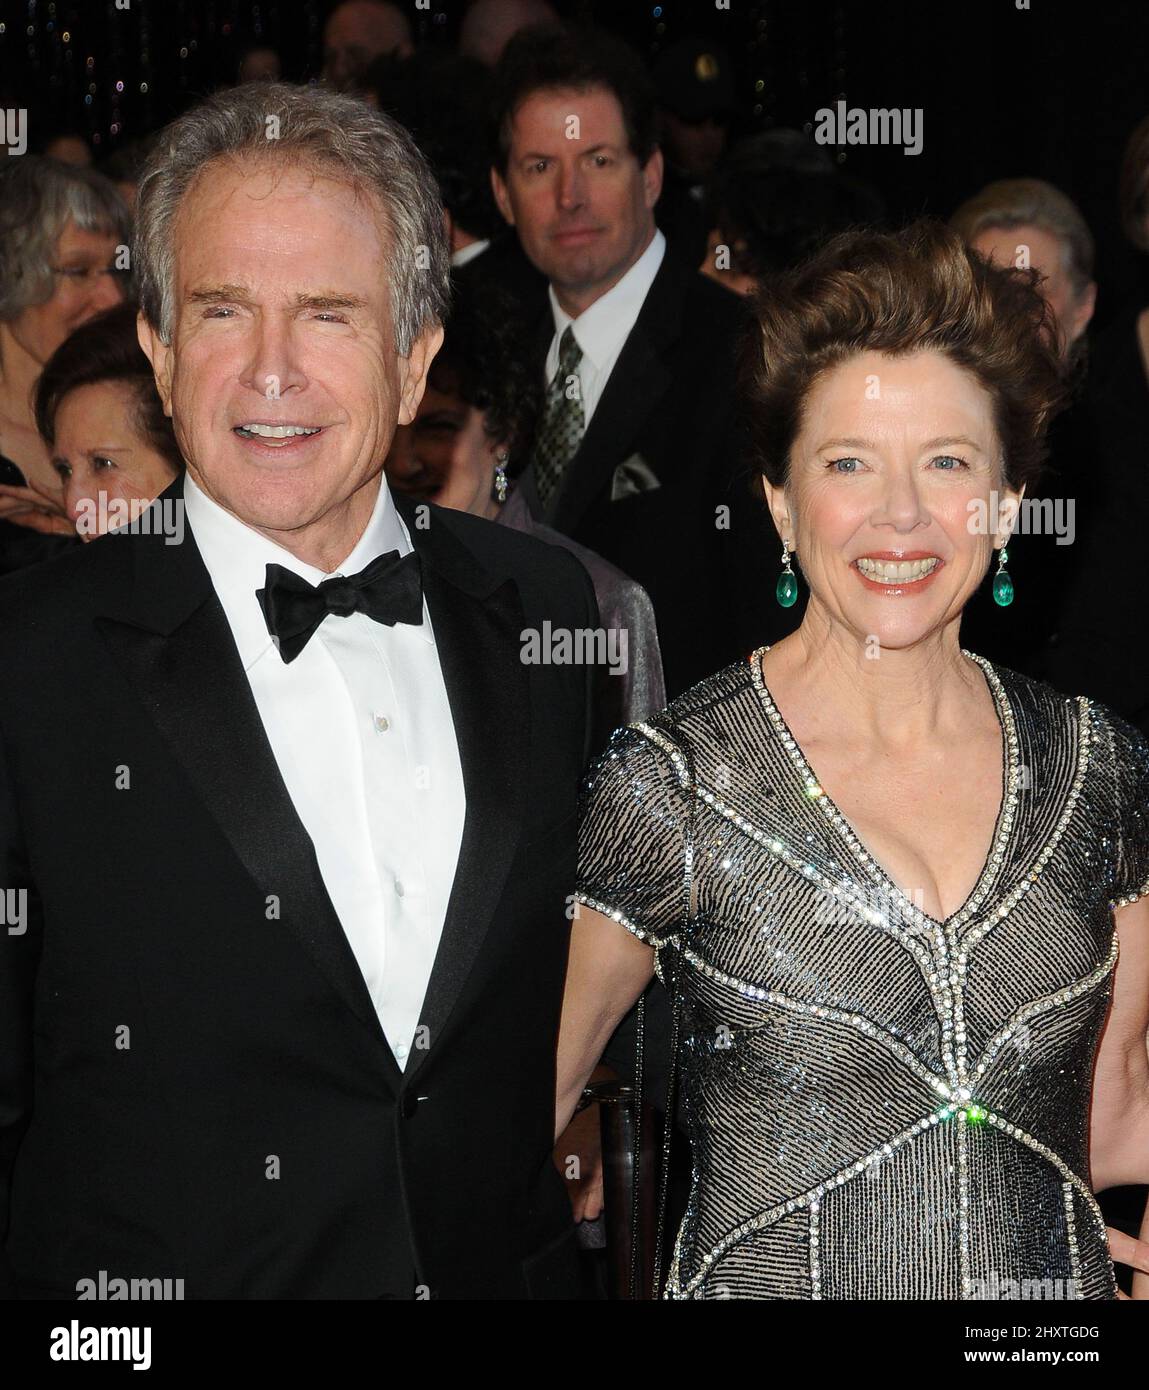 Warren Beatty and Annette Bening at the 83rd Academy Awards at the Kodak Theatre, Los Angeles. Stock Photo